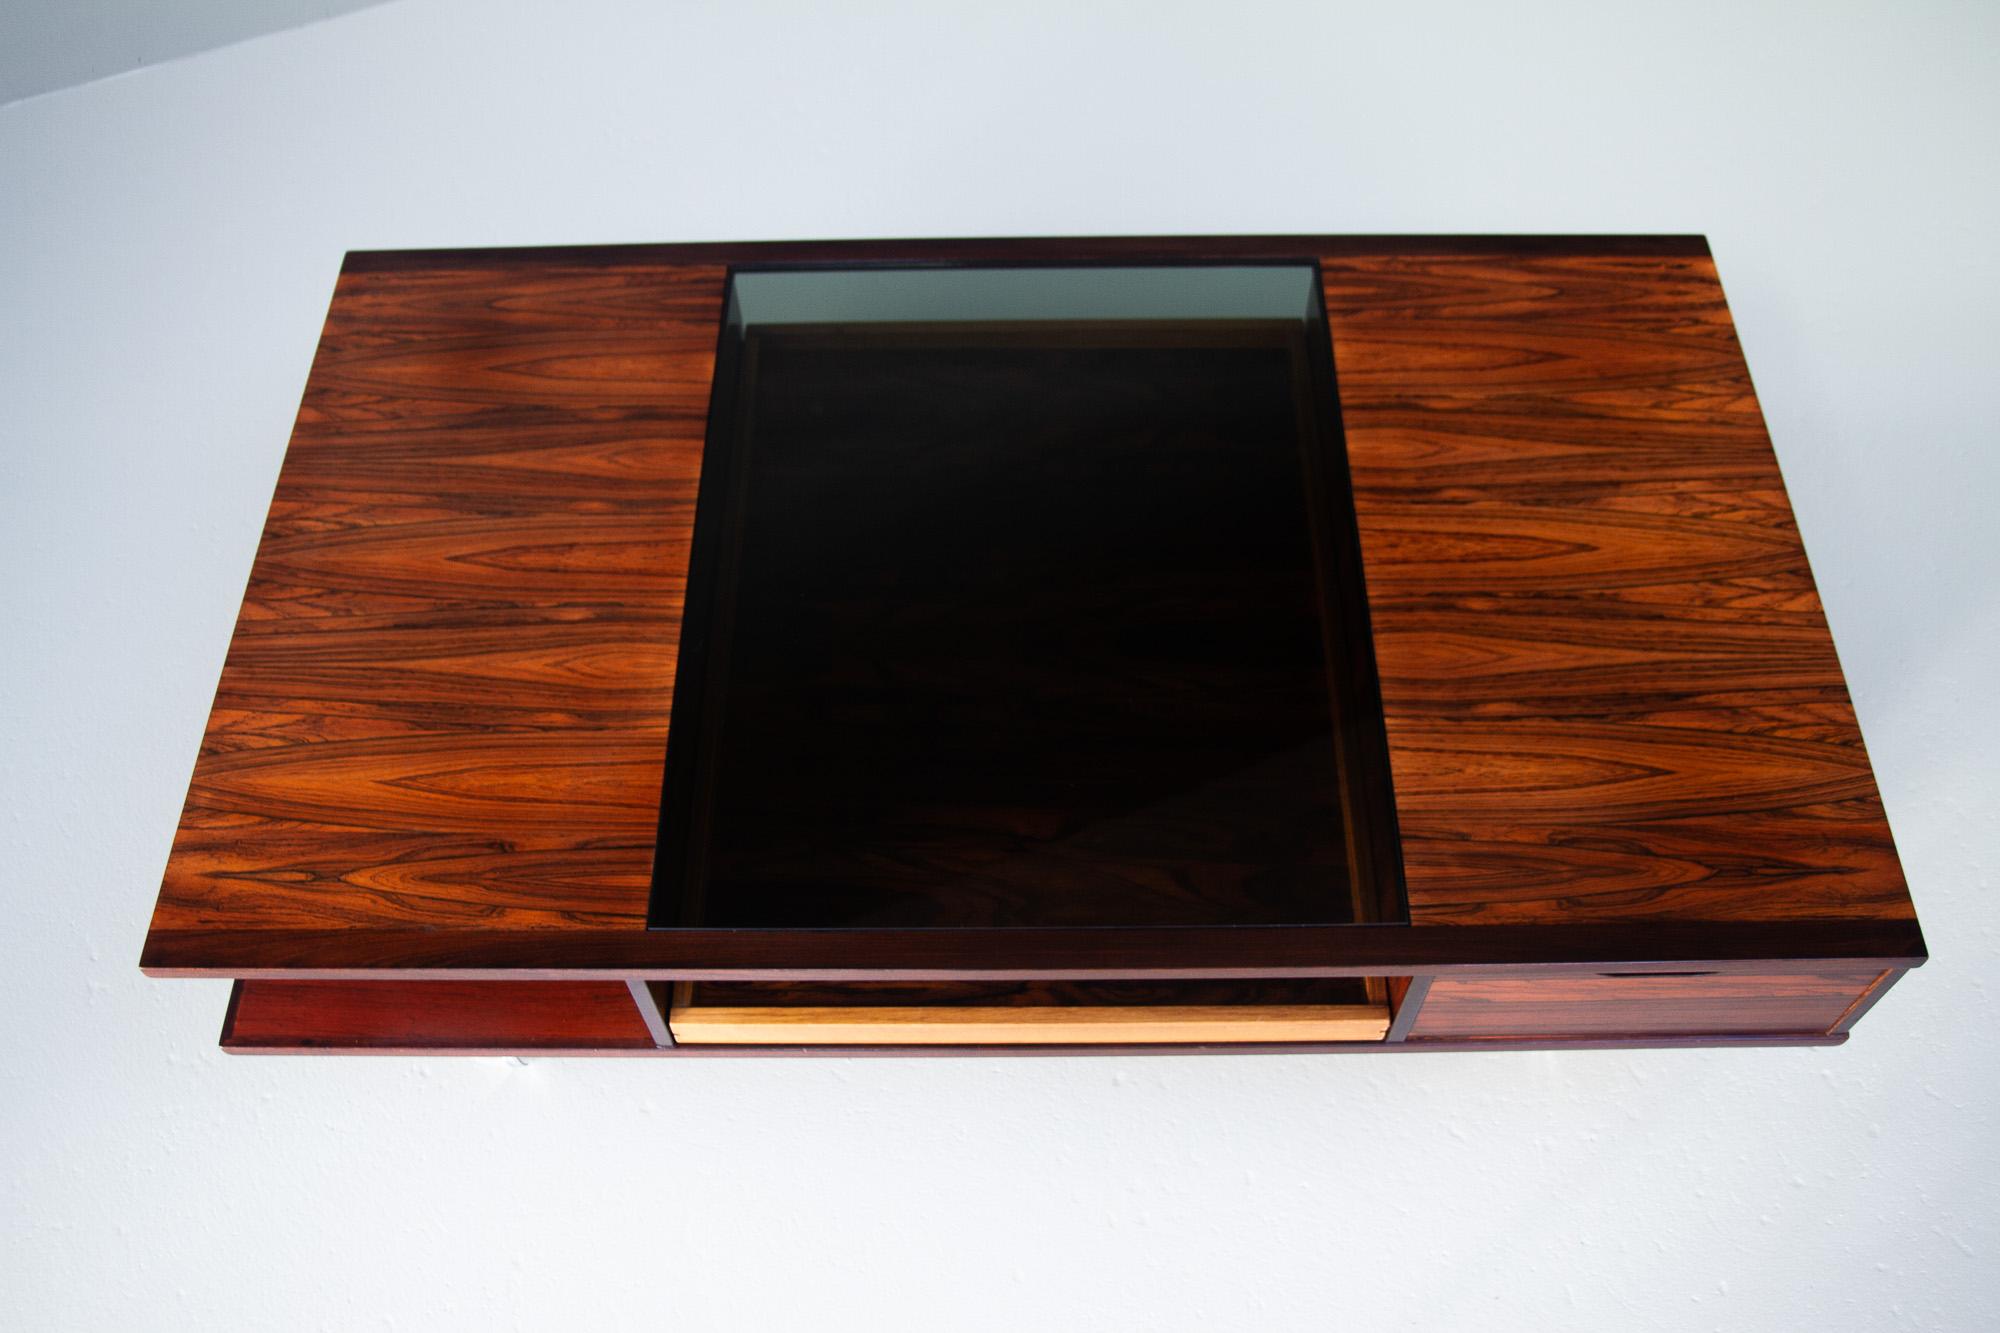 Vintage Danish Rosewood Coffee Table, 1960s For Sale 2